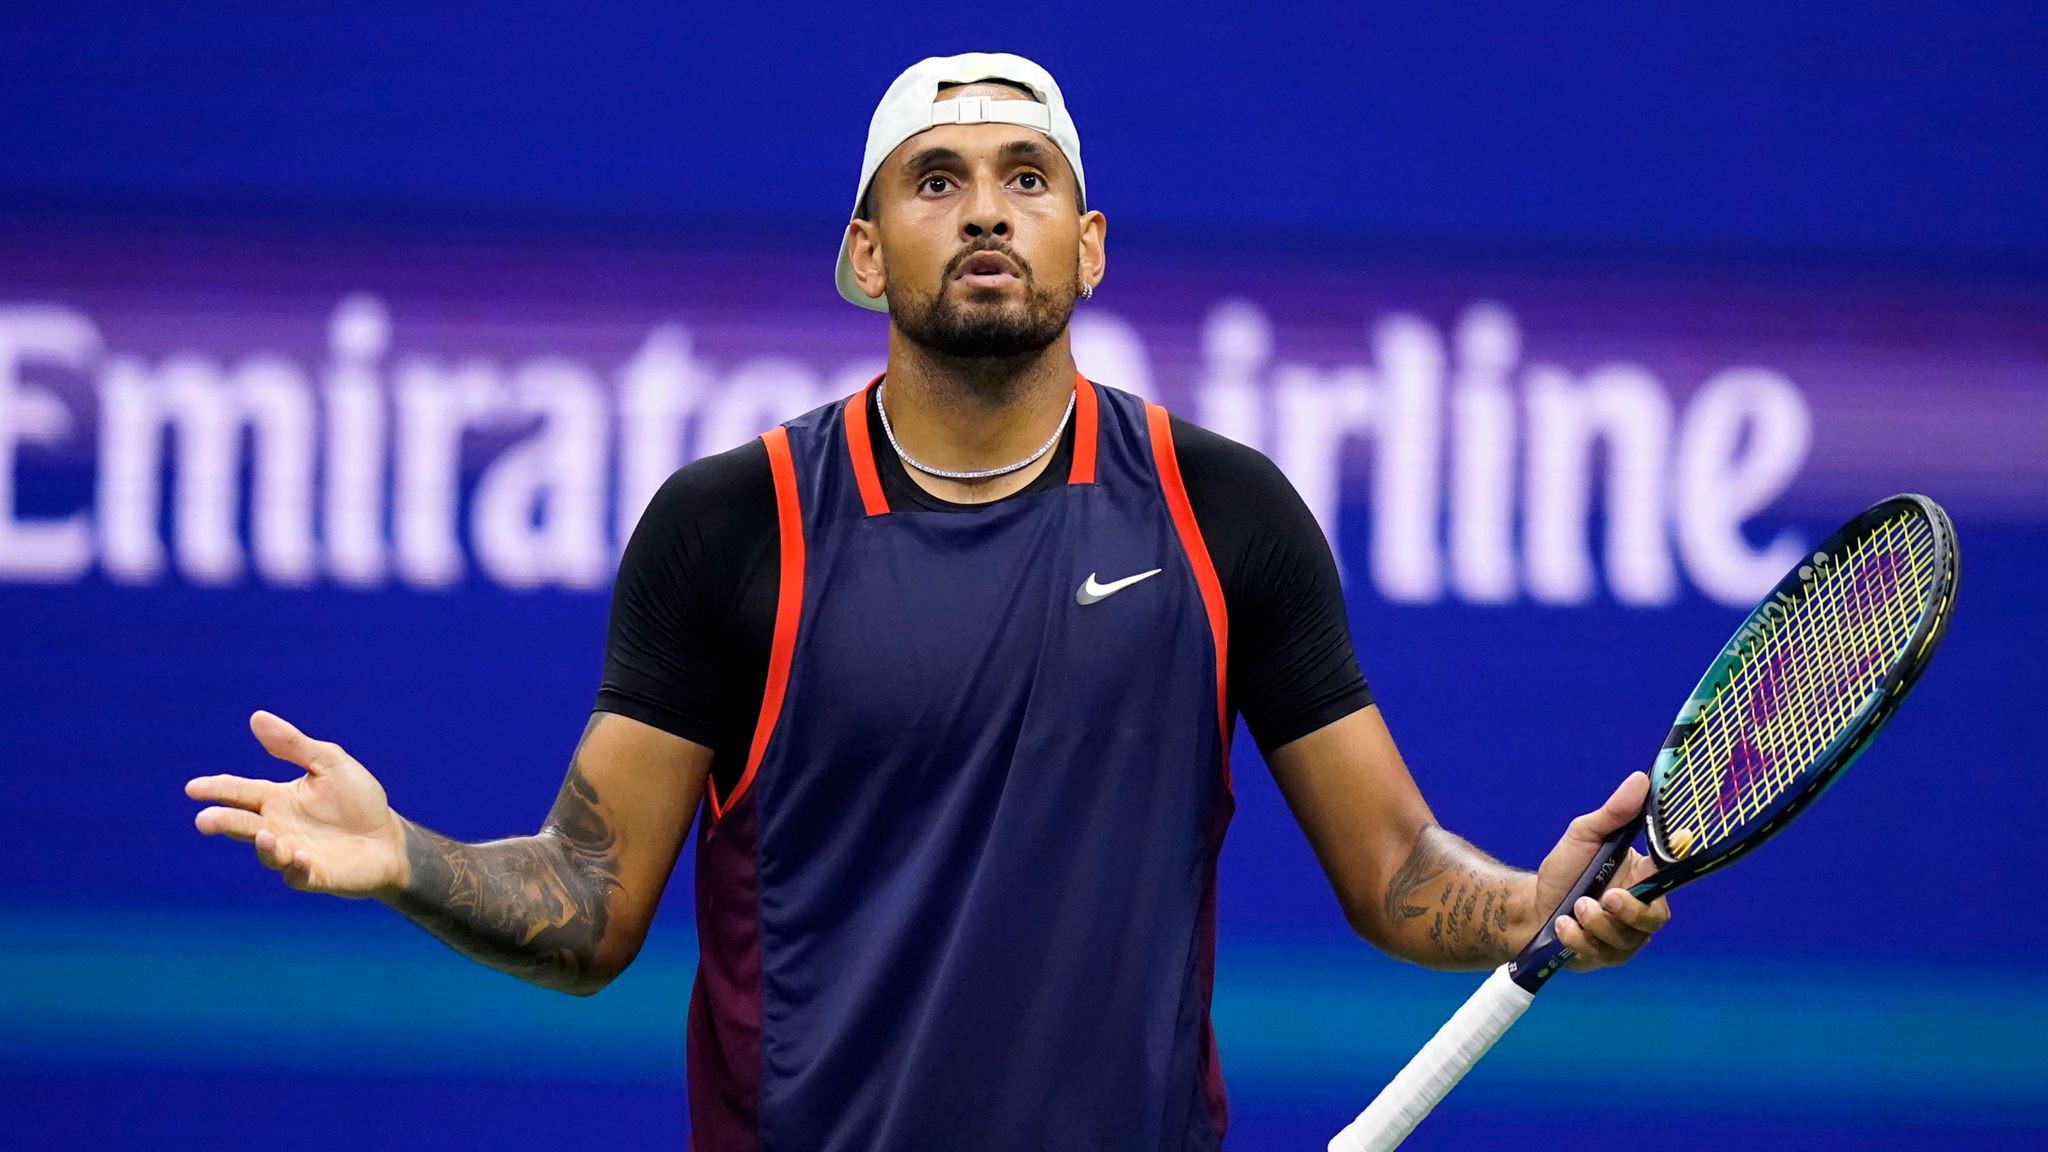 US Open Nick Kyrgios bows out after loss to Karen Khachanov in quarter-finals Tennis News Sky Sports